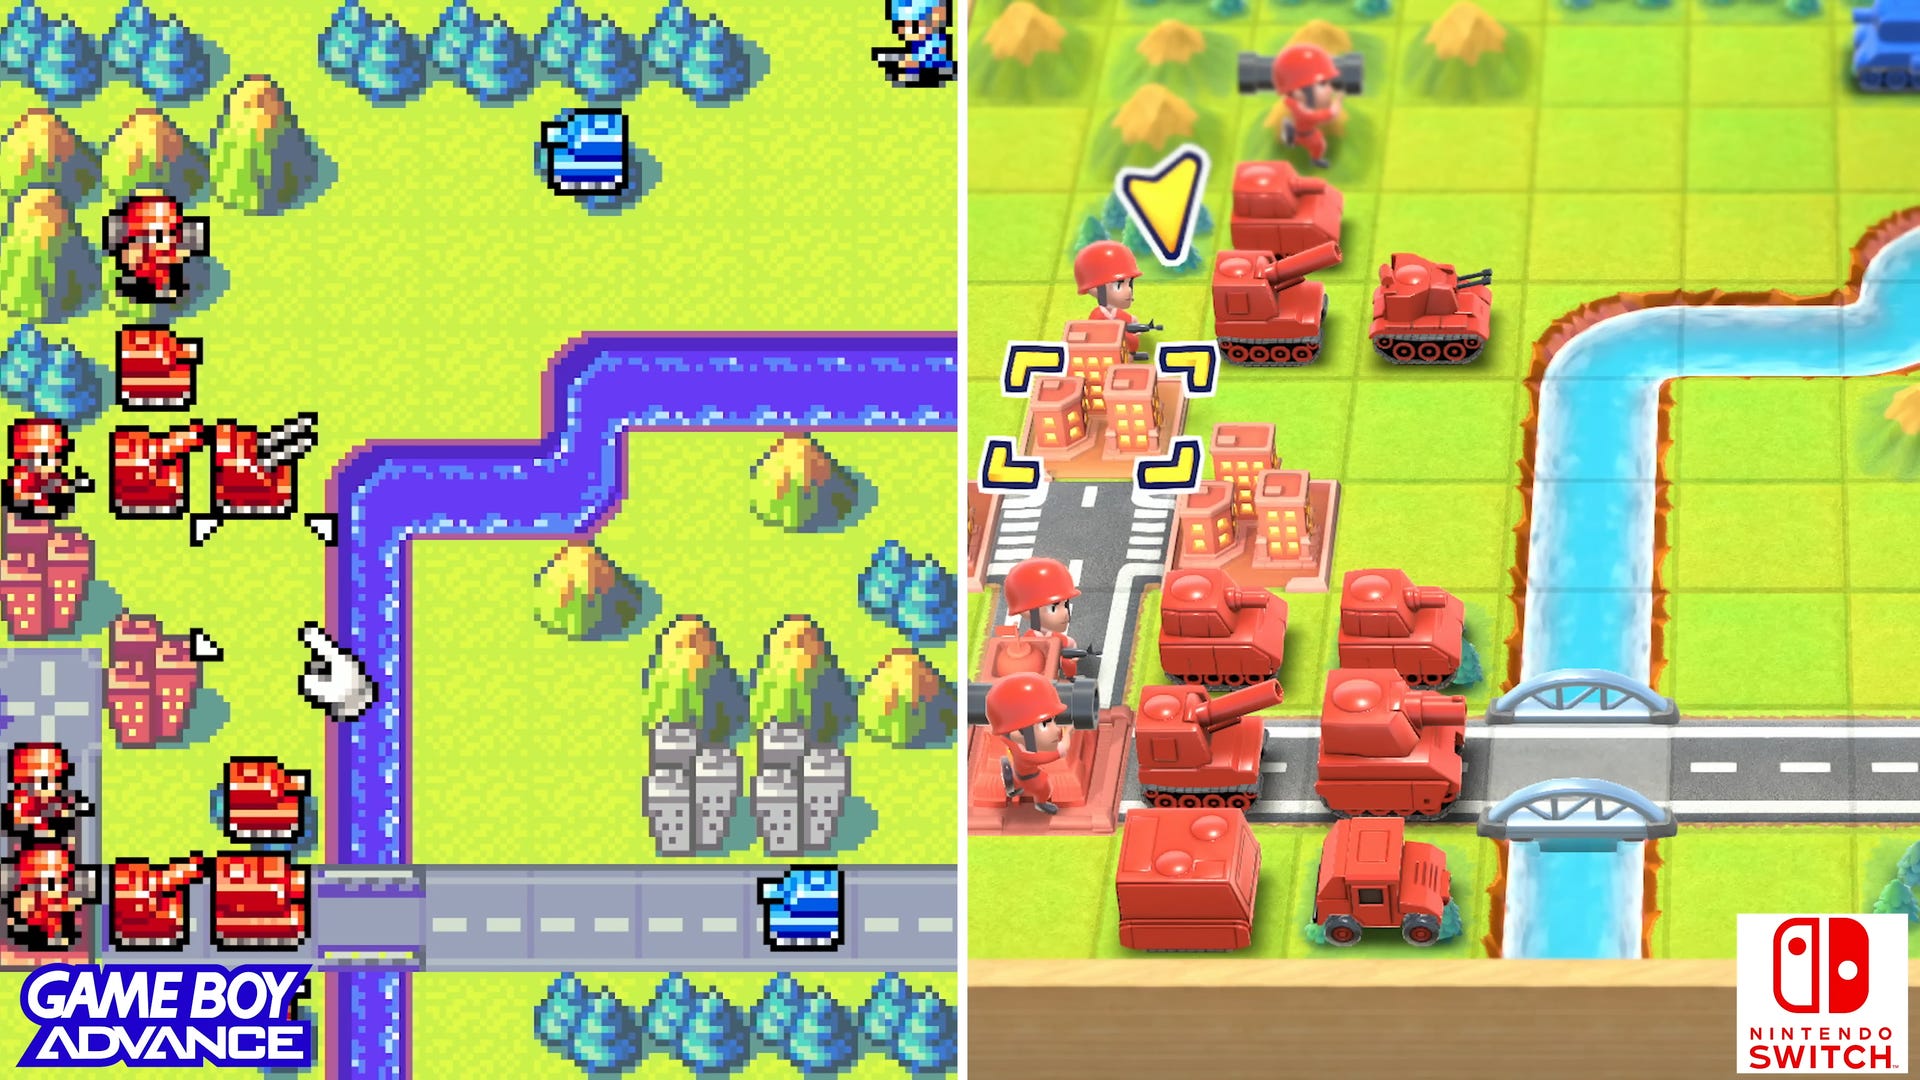 Advance Wars 1+2 Re-Boot Camp: an enjoyable remake tempered by  disappointing visuals